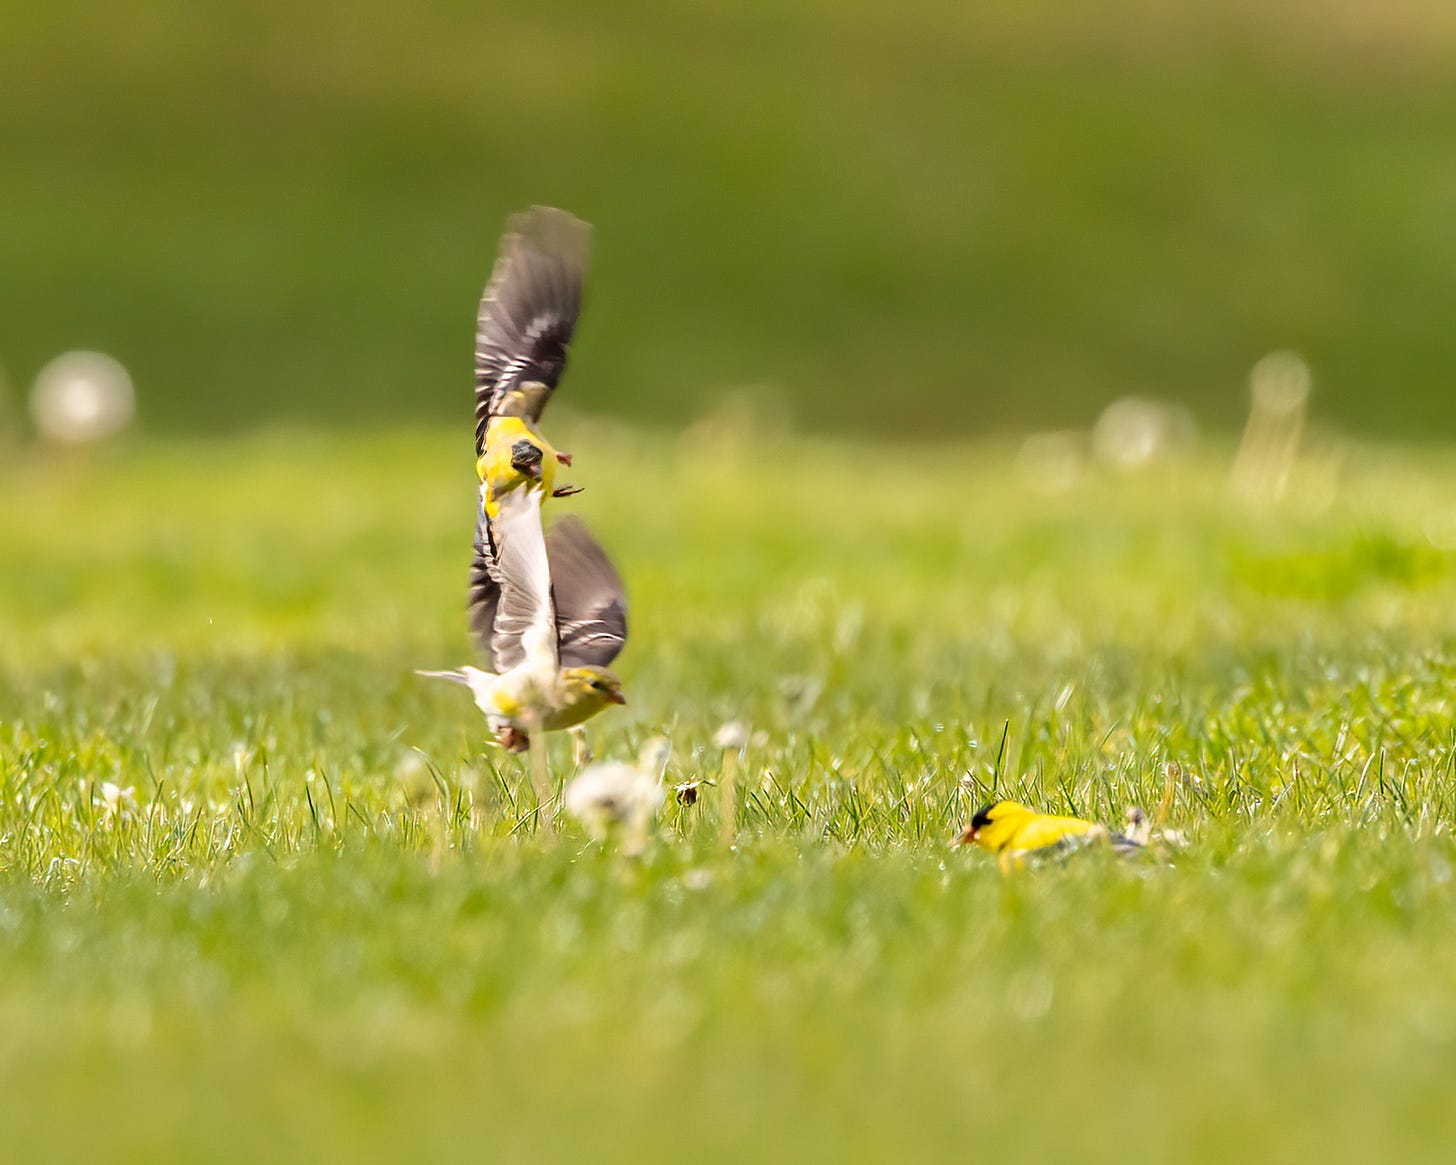 In this image, two males are in pursuit of one female. The goldfinch in the forefront is sitting on the ground watching as the second male is acrobatically flying above the fluttering female.